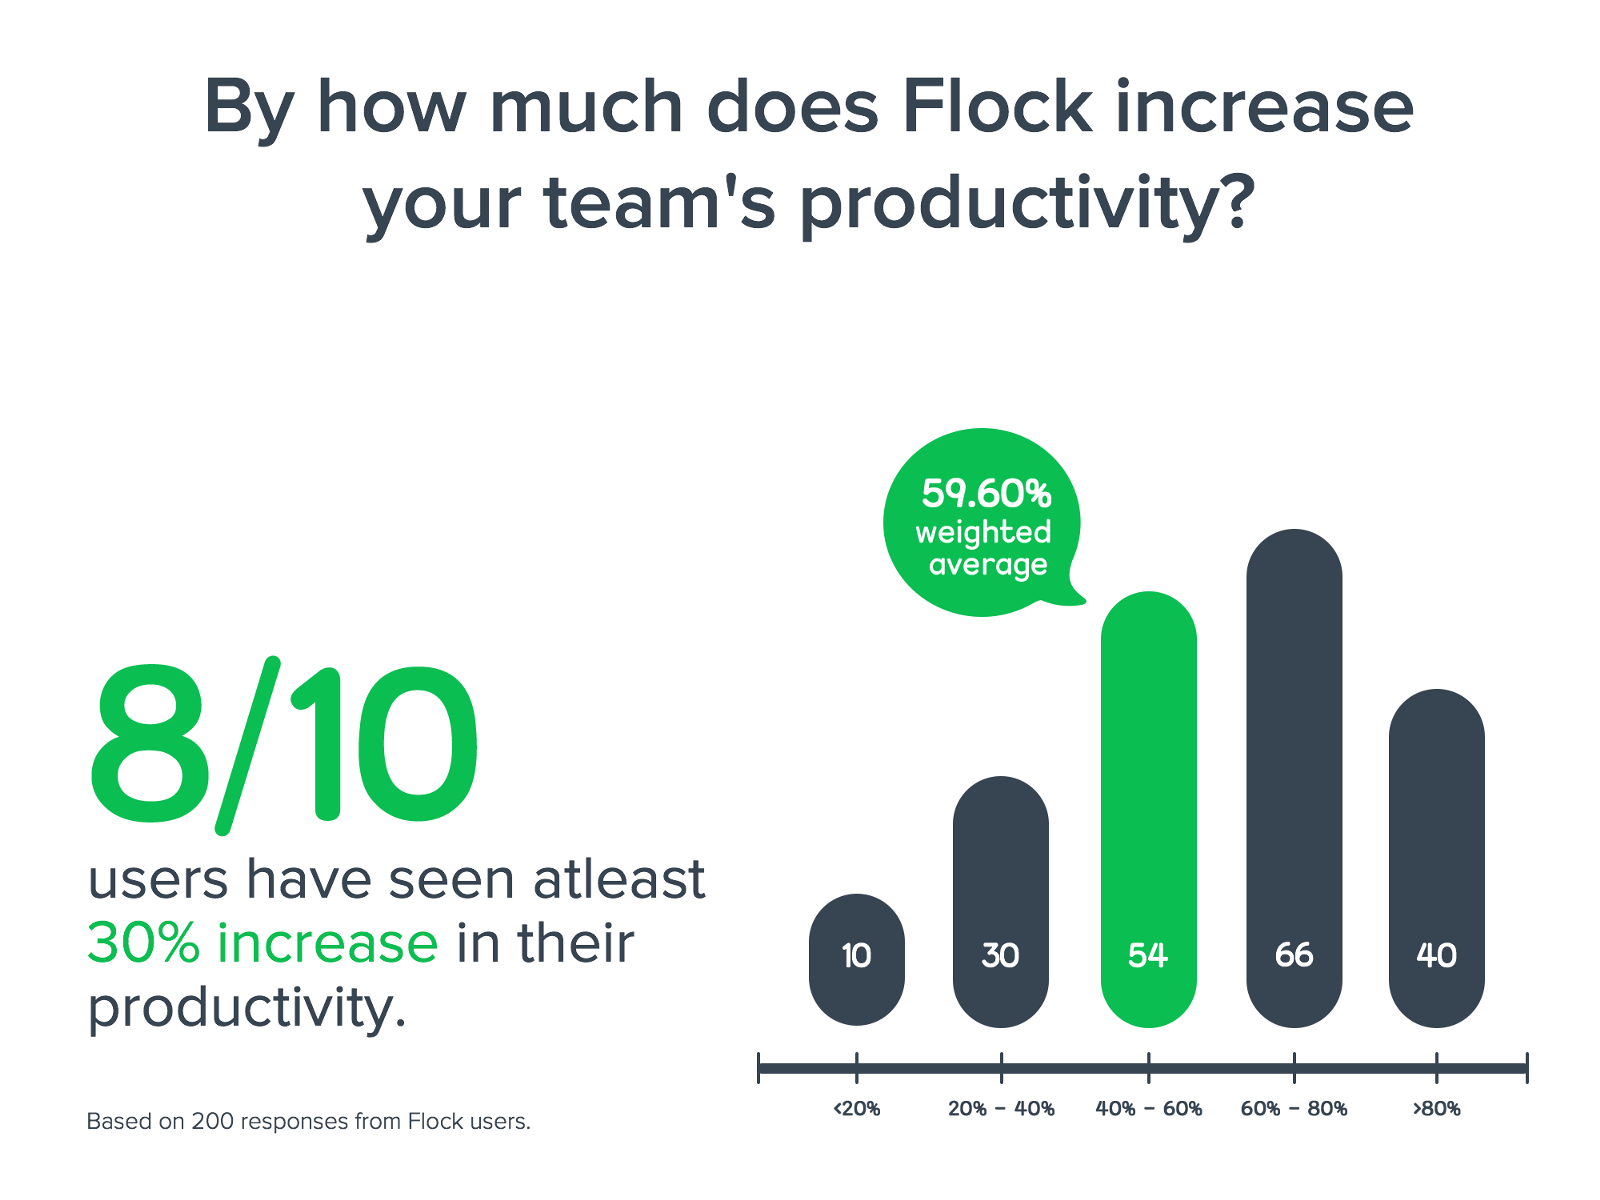 Graphic: 8/10 Flock users have seen at least 30% increase in productivity.